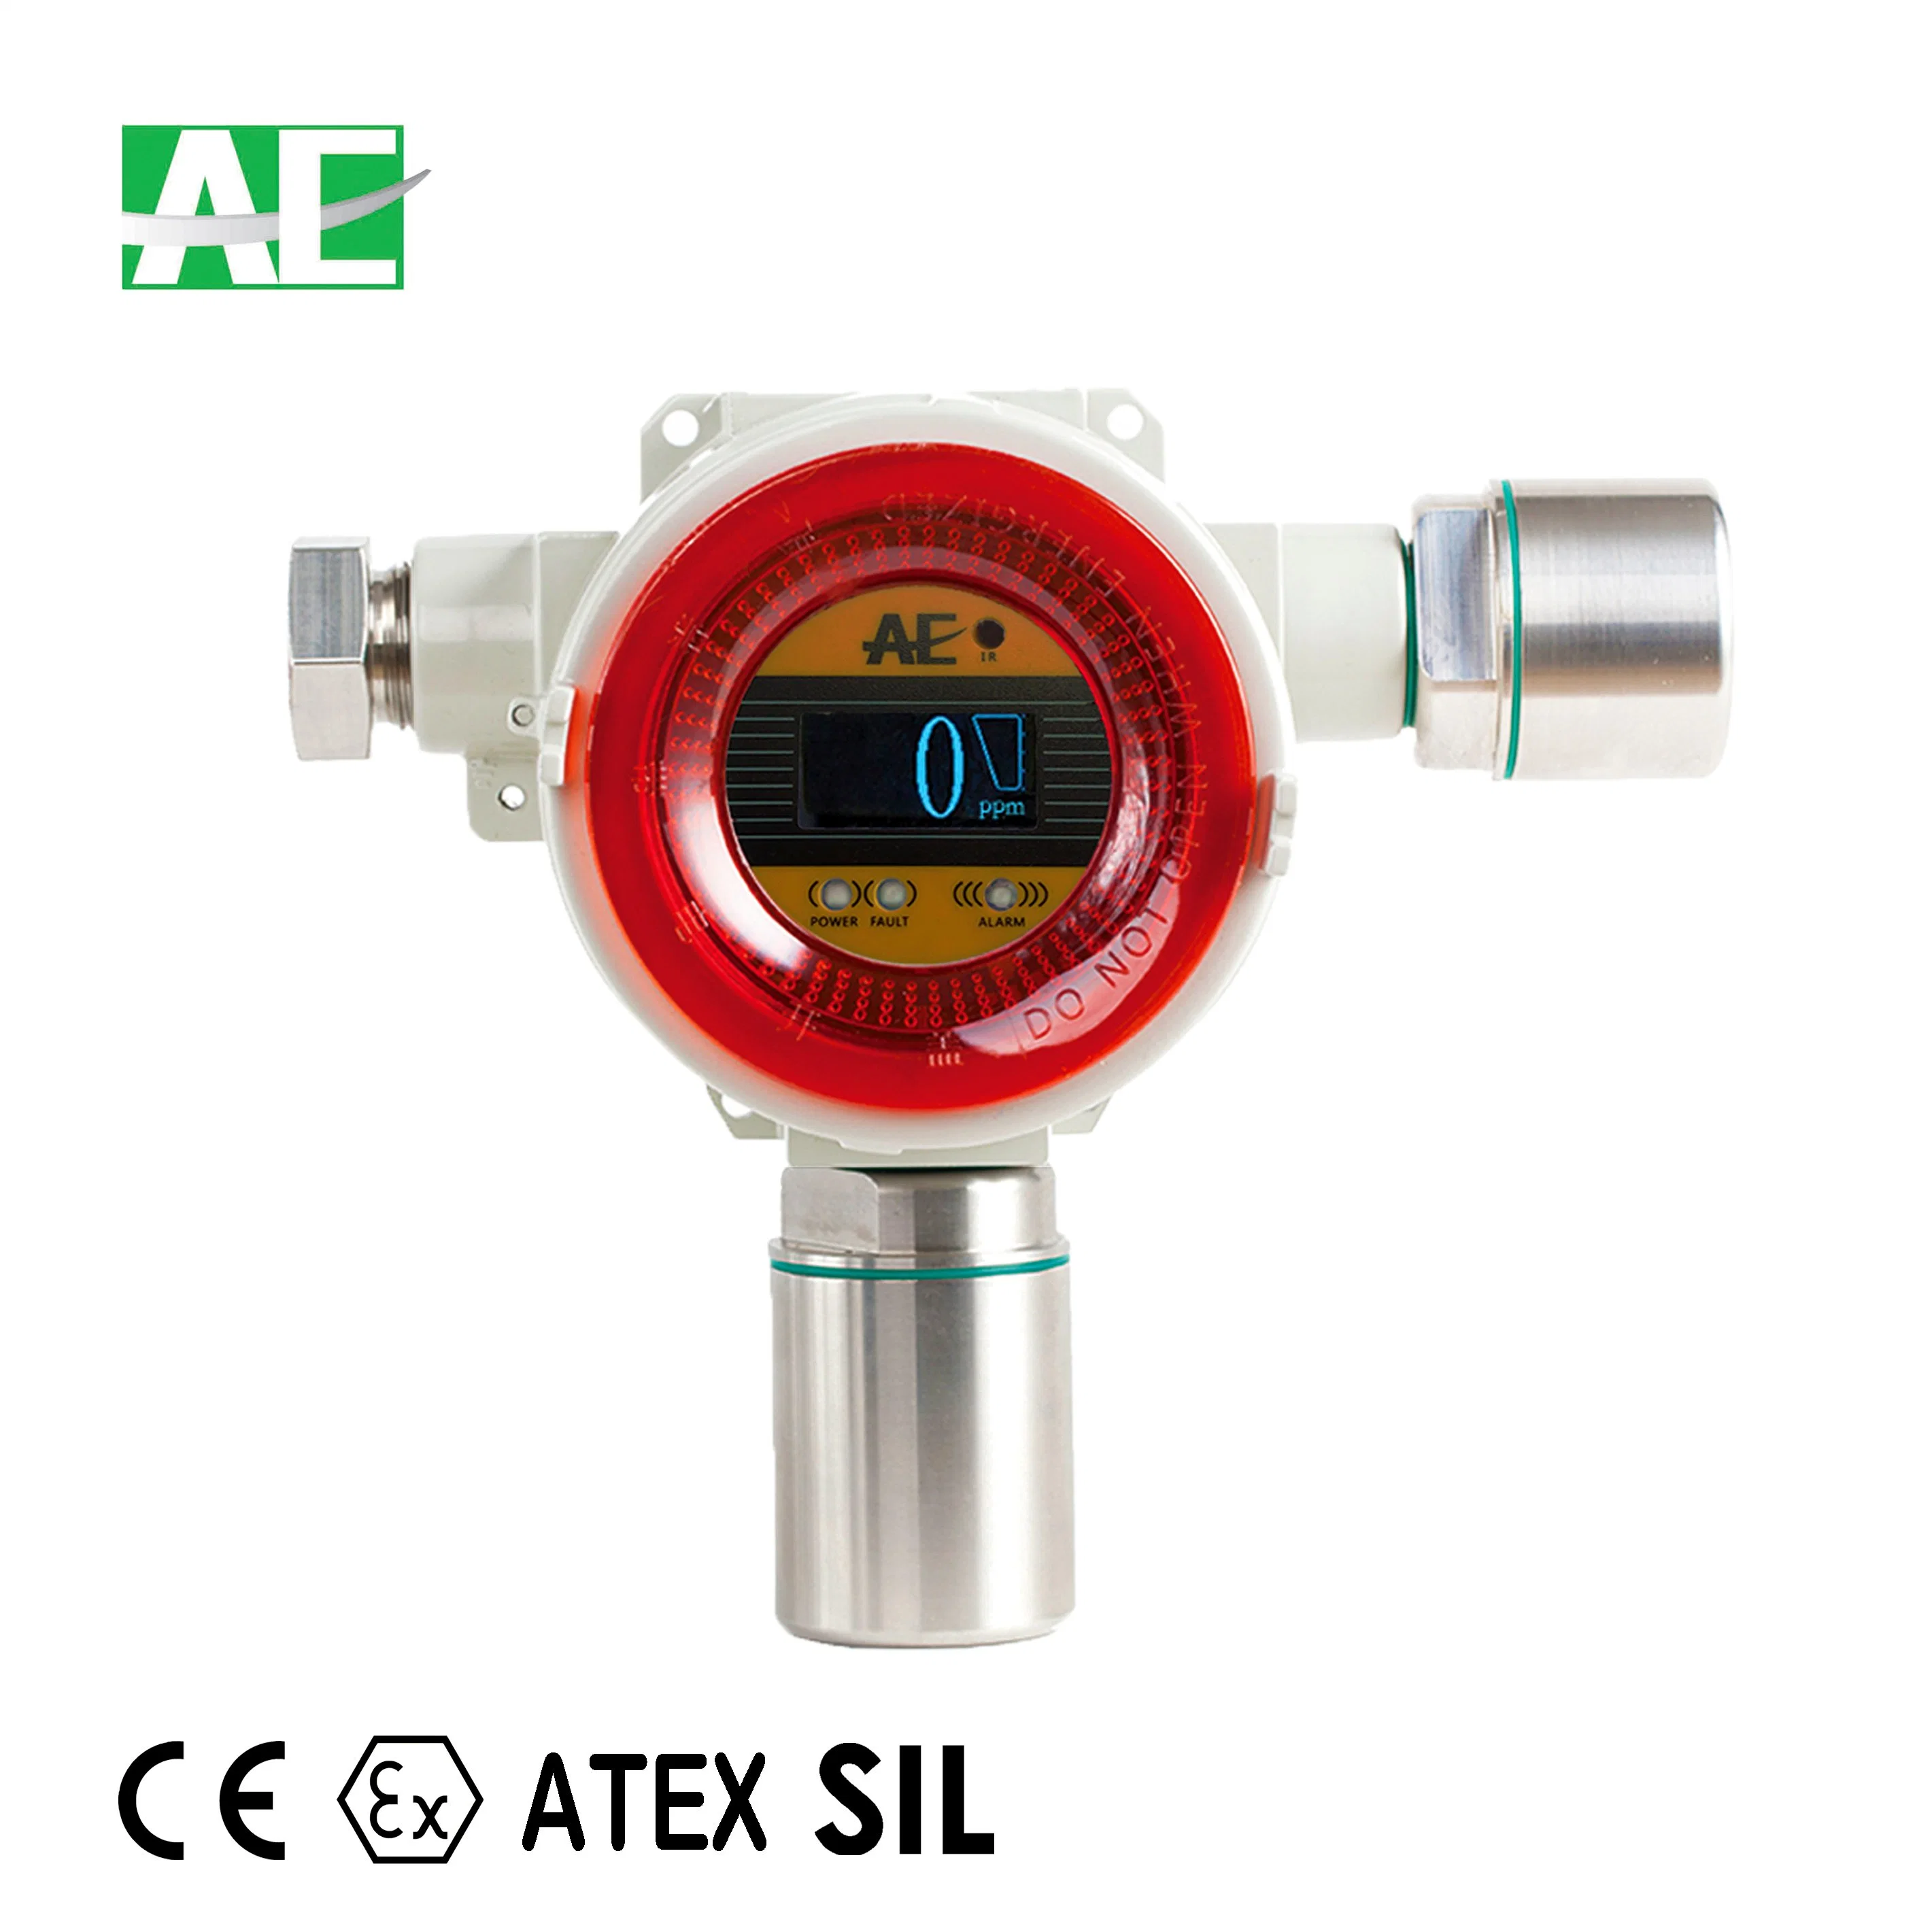 Iecex Atex Sil2 Certified Fixed Gas Monitor with Integrated Sound Light Alarm and OLED Display